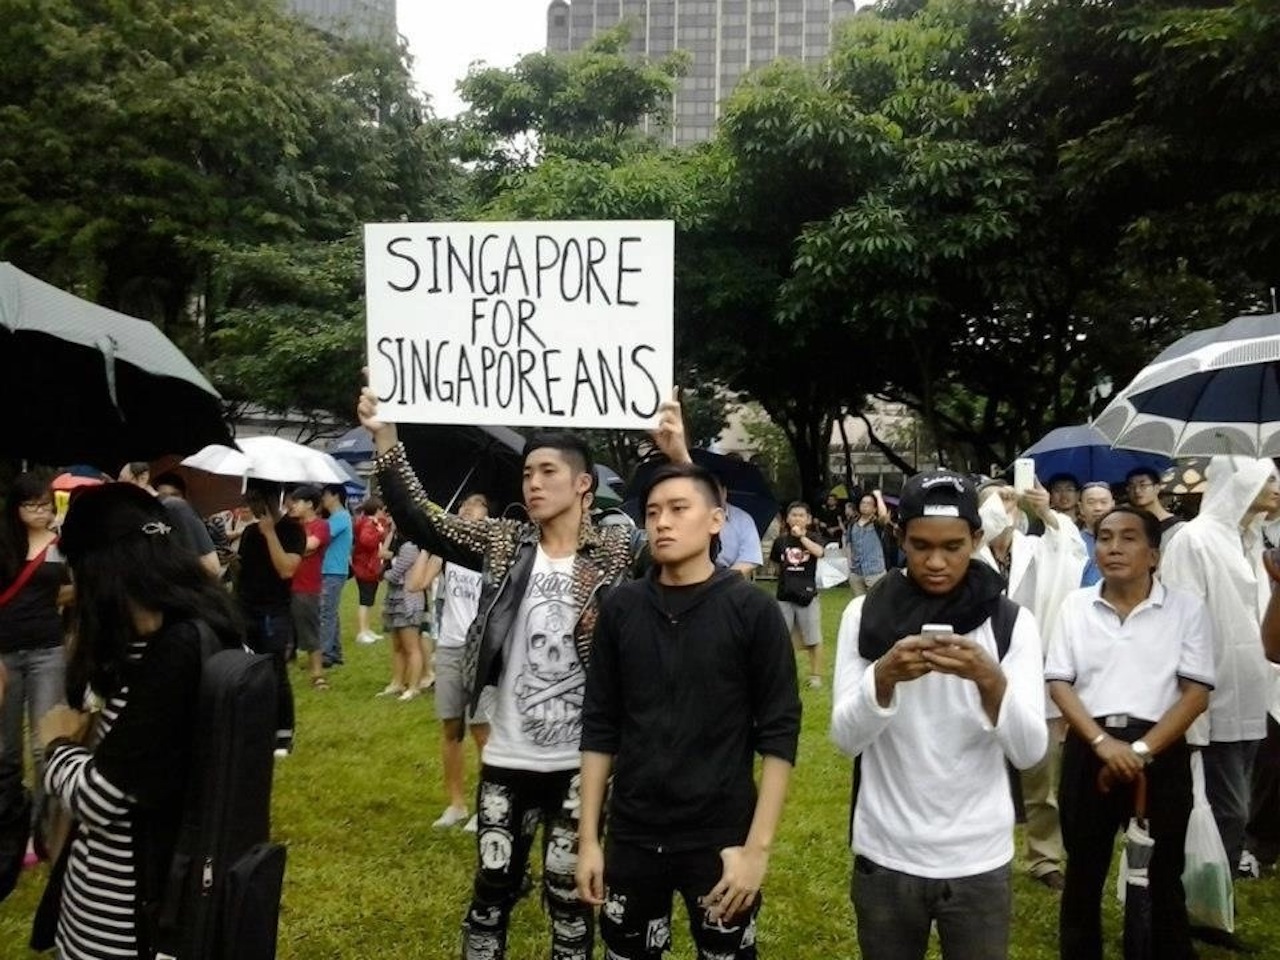 Dear Singaporeans, Foreigners Are Not Stealing Your Jobs